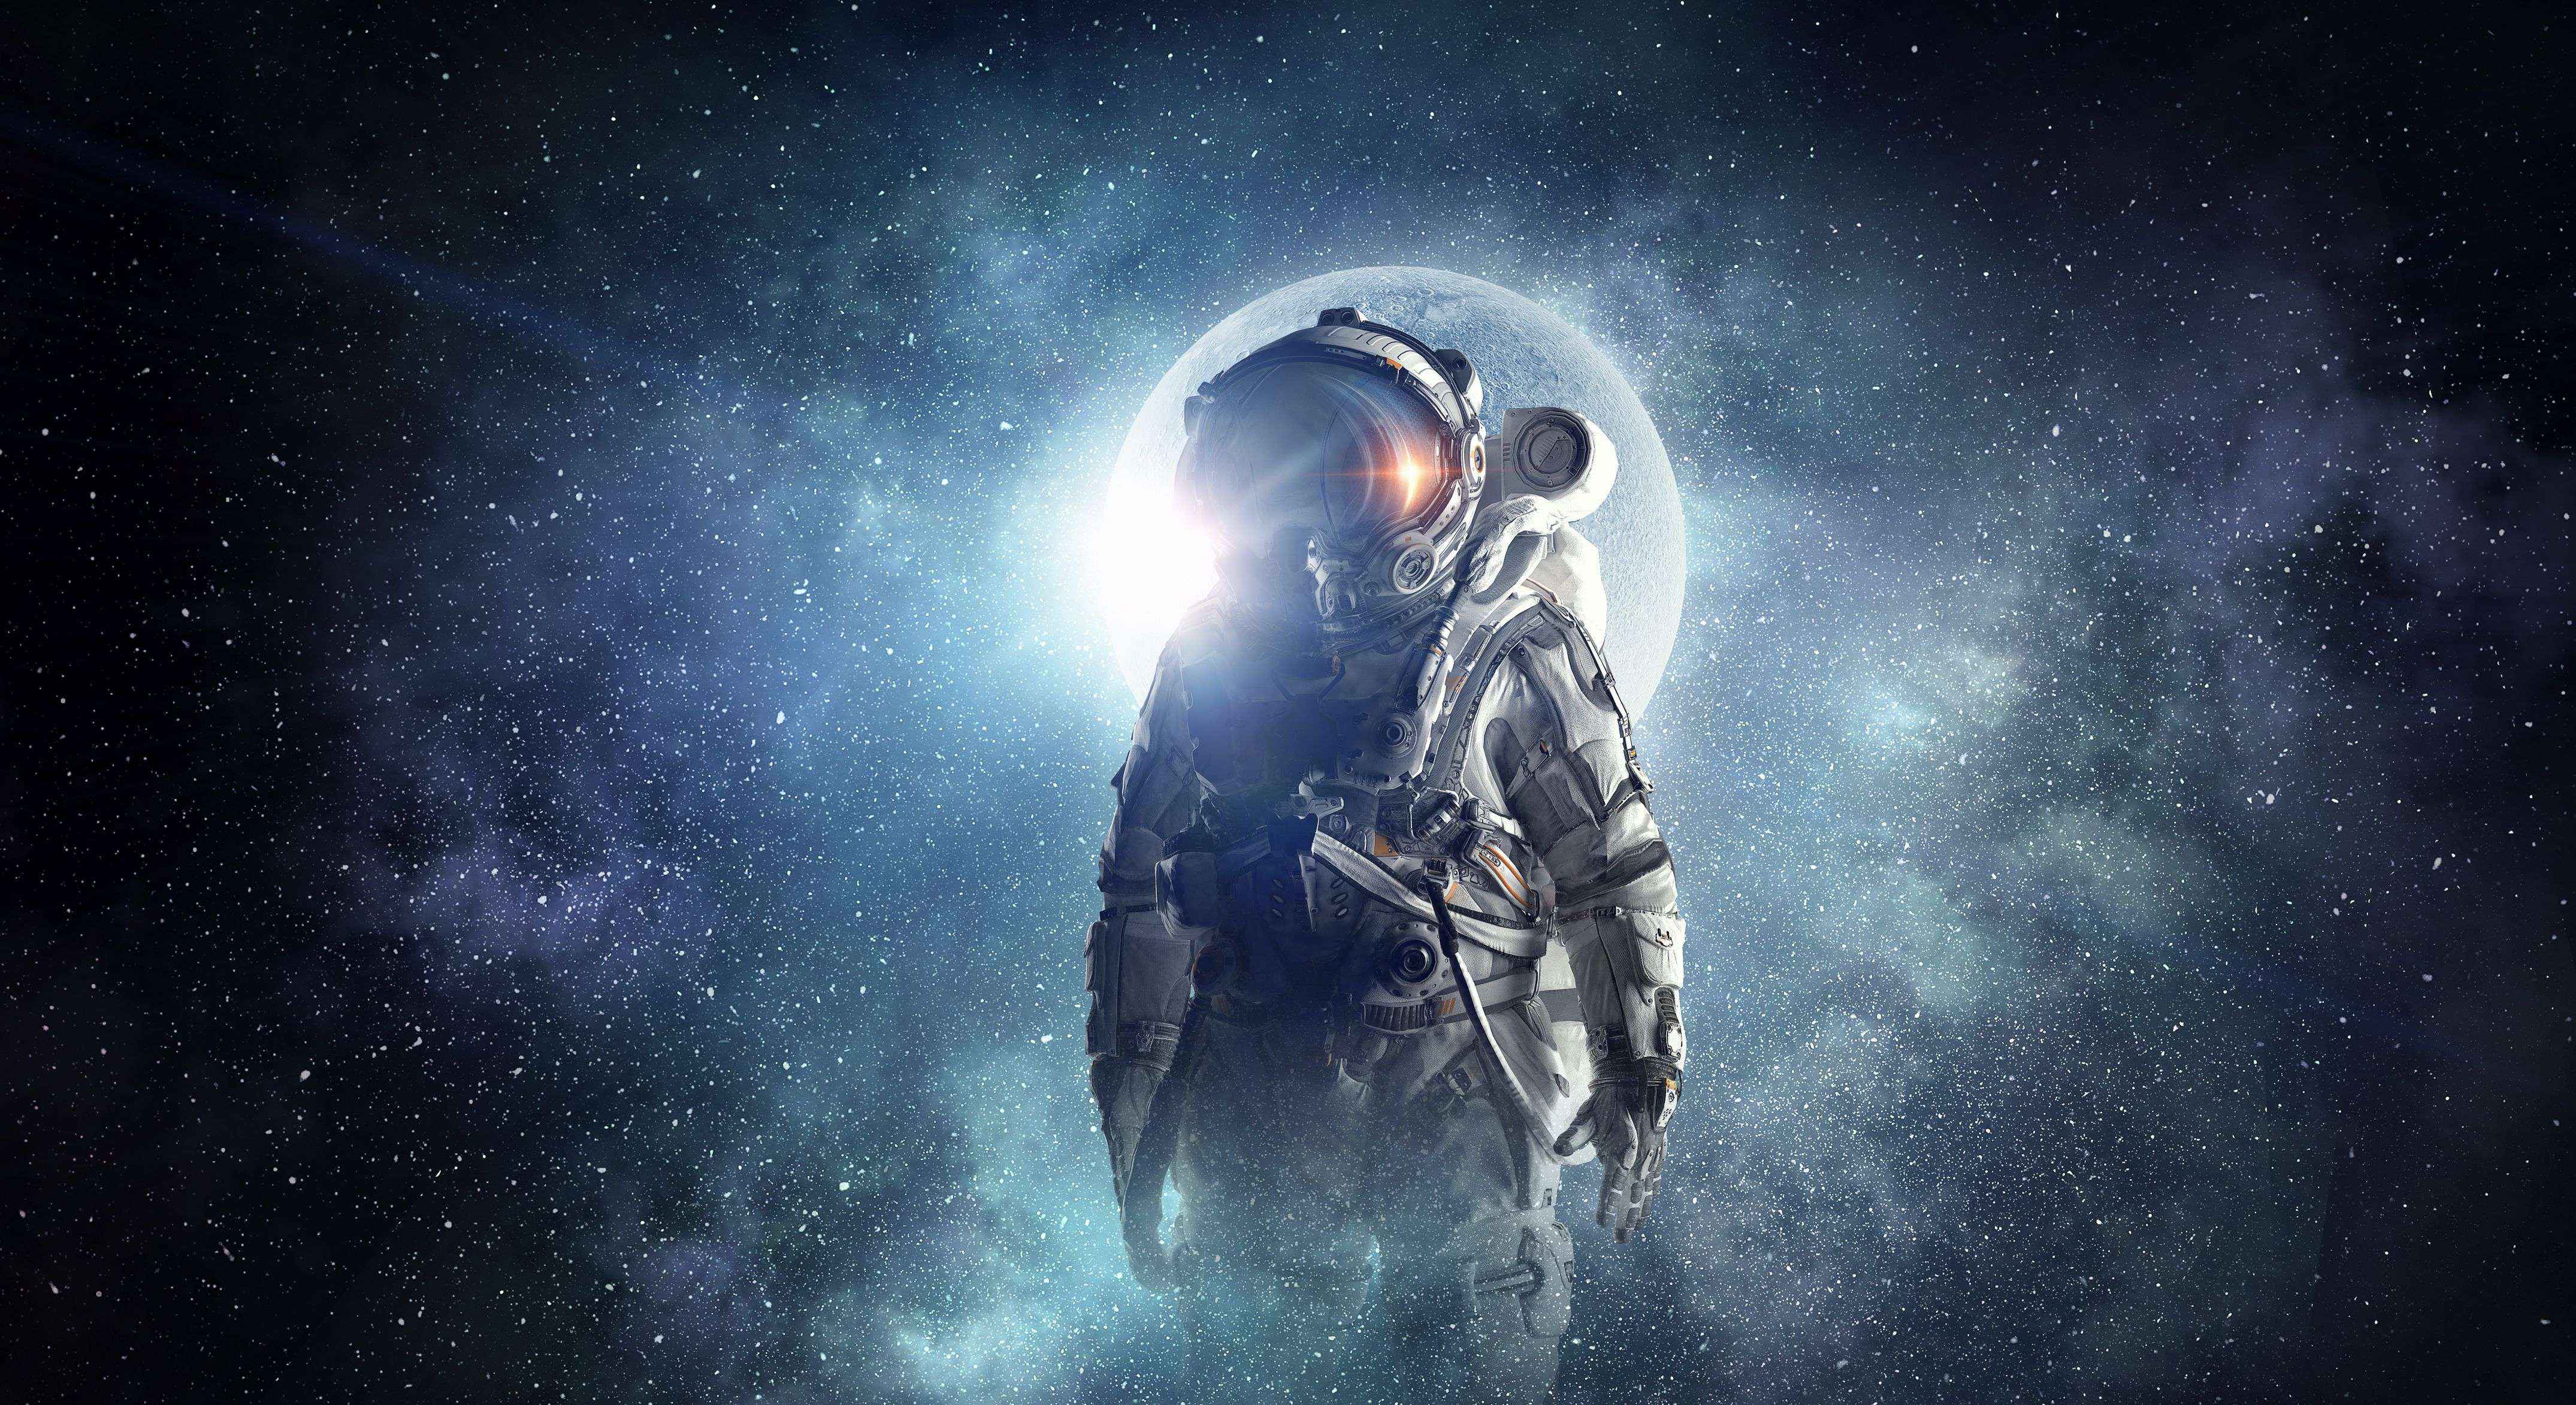 Astronaut In Space Wallpaper - Wall.GiftWatches.CO